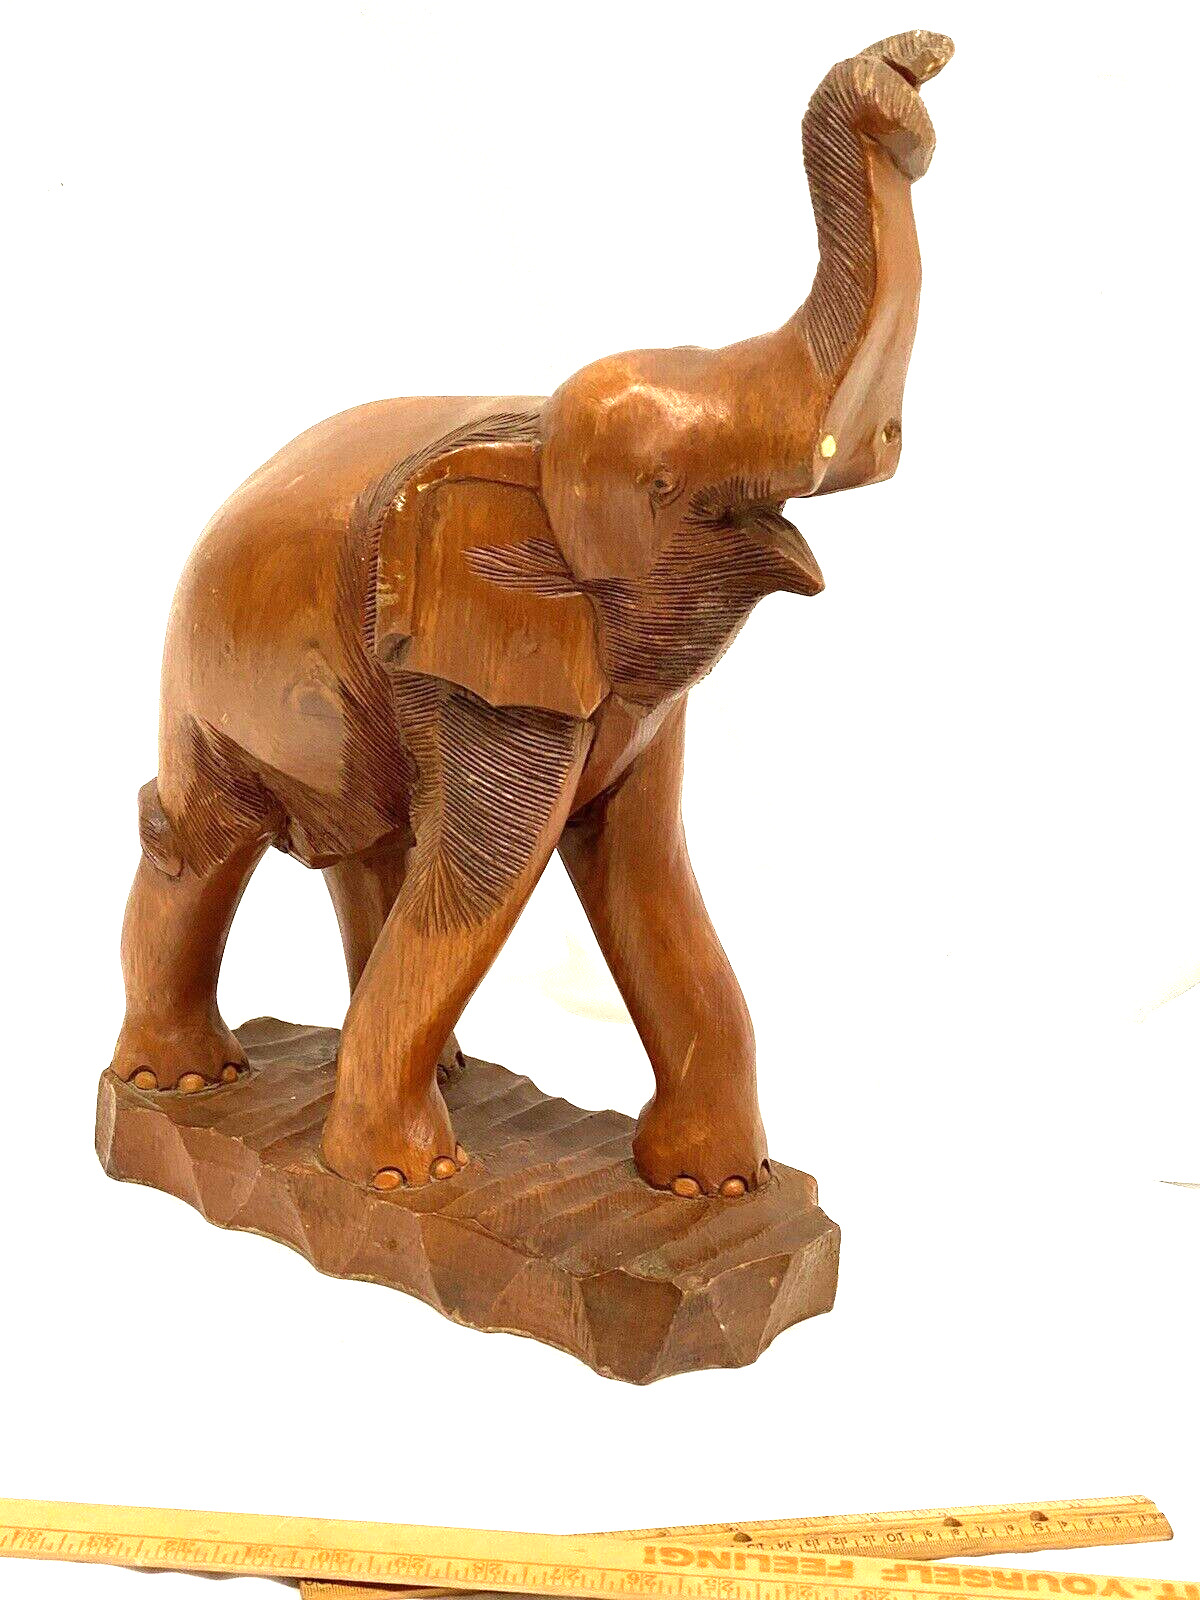 Vintage Large Wooden Carved Mammoth Elephant Statue 20” Tall 13”wood Figurine